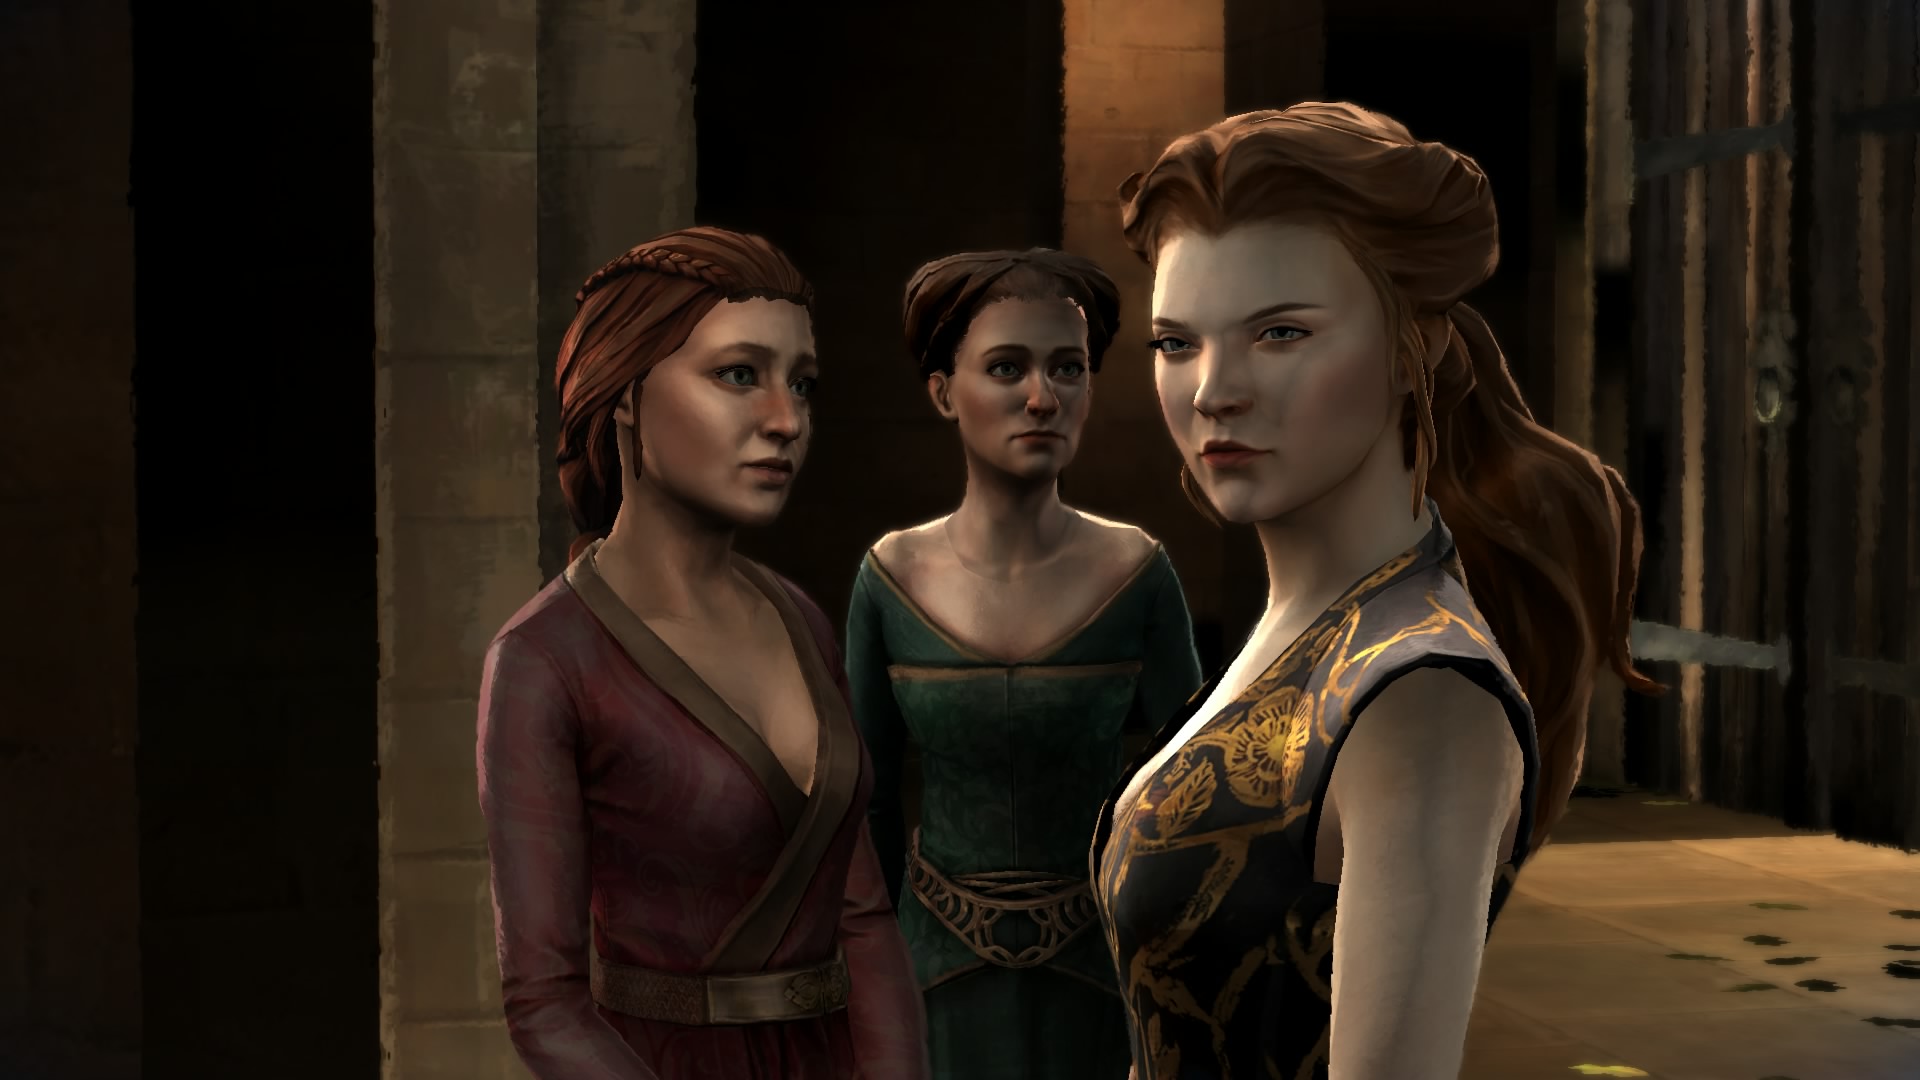 Game of Thrones: Episode 5 - A Nest of Vipers Screenshots